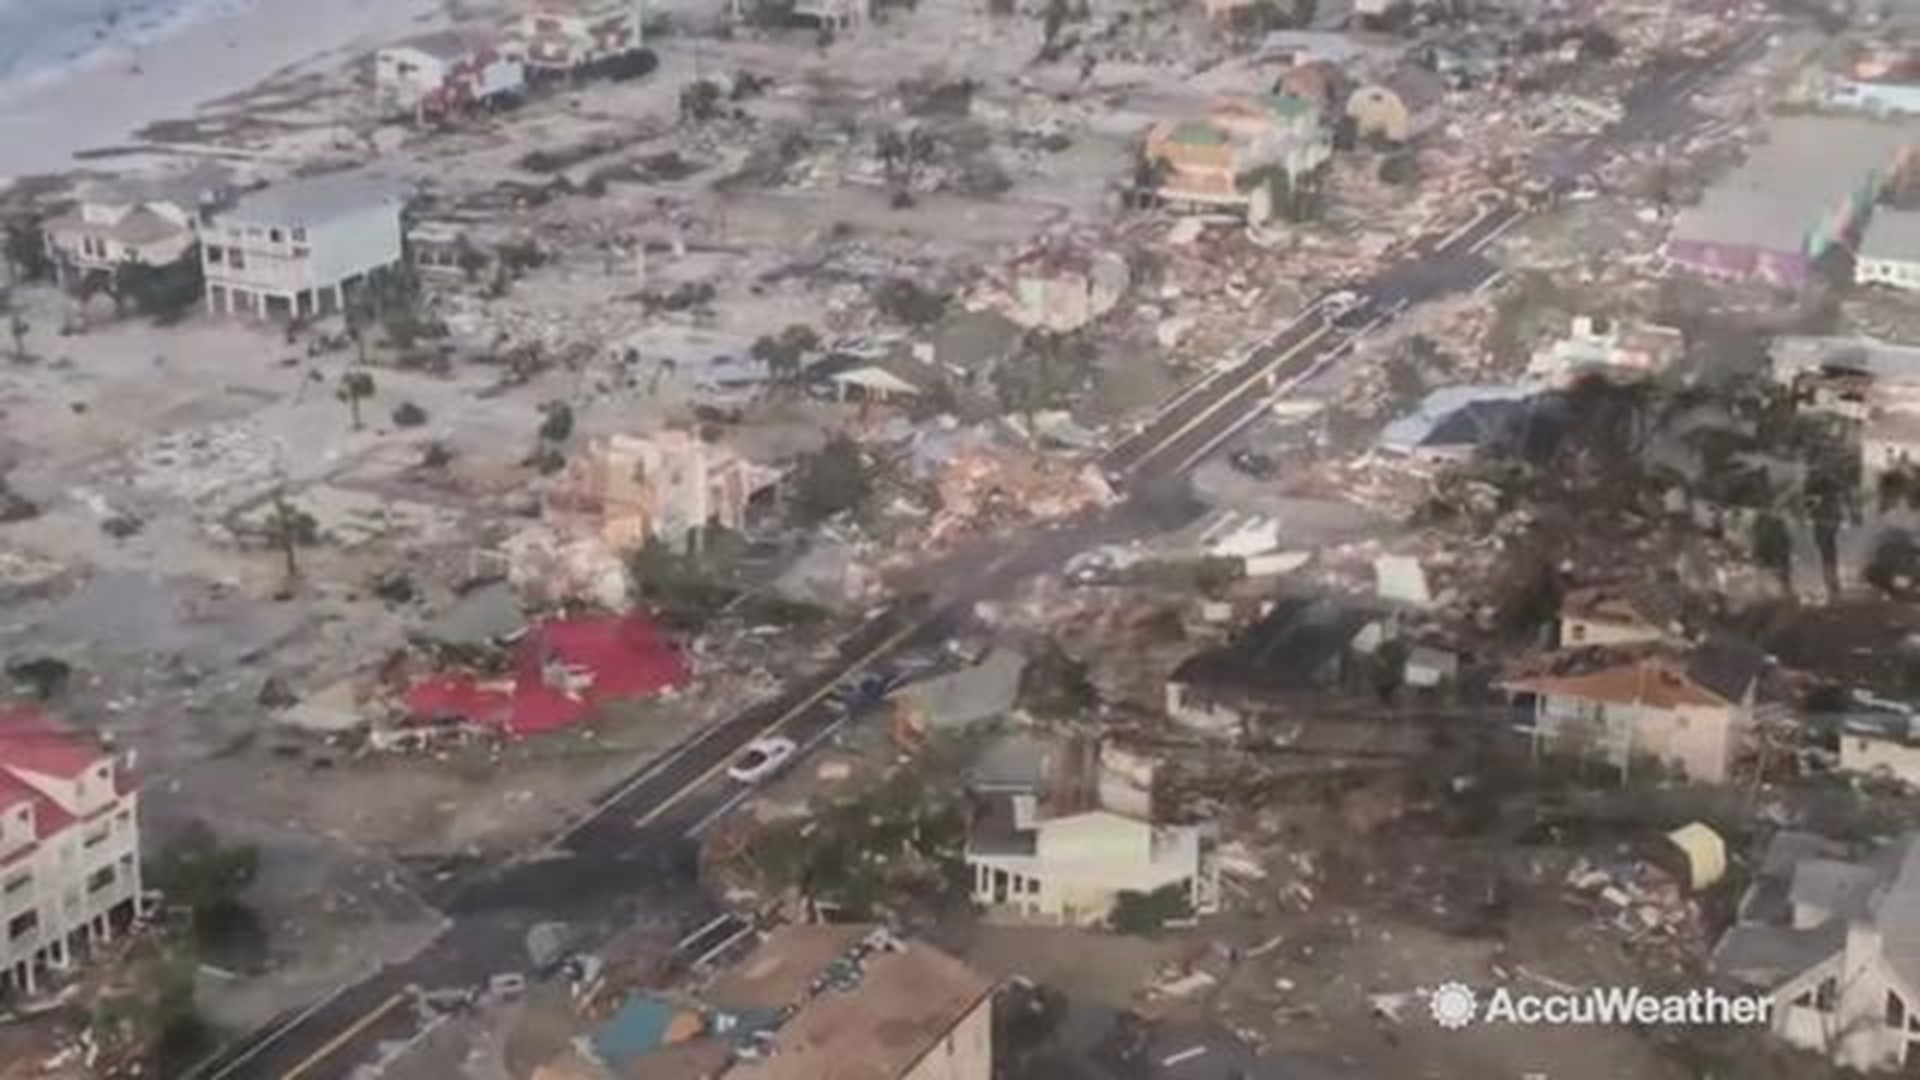 Homeowners in Mexico Beach, Florida returned to utter devastation. This is the first time they are seeing the damage for themselves. Almost all of their homes completely wiped out by Michael.